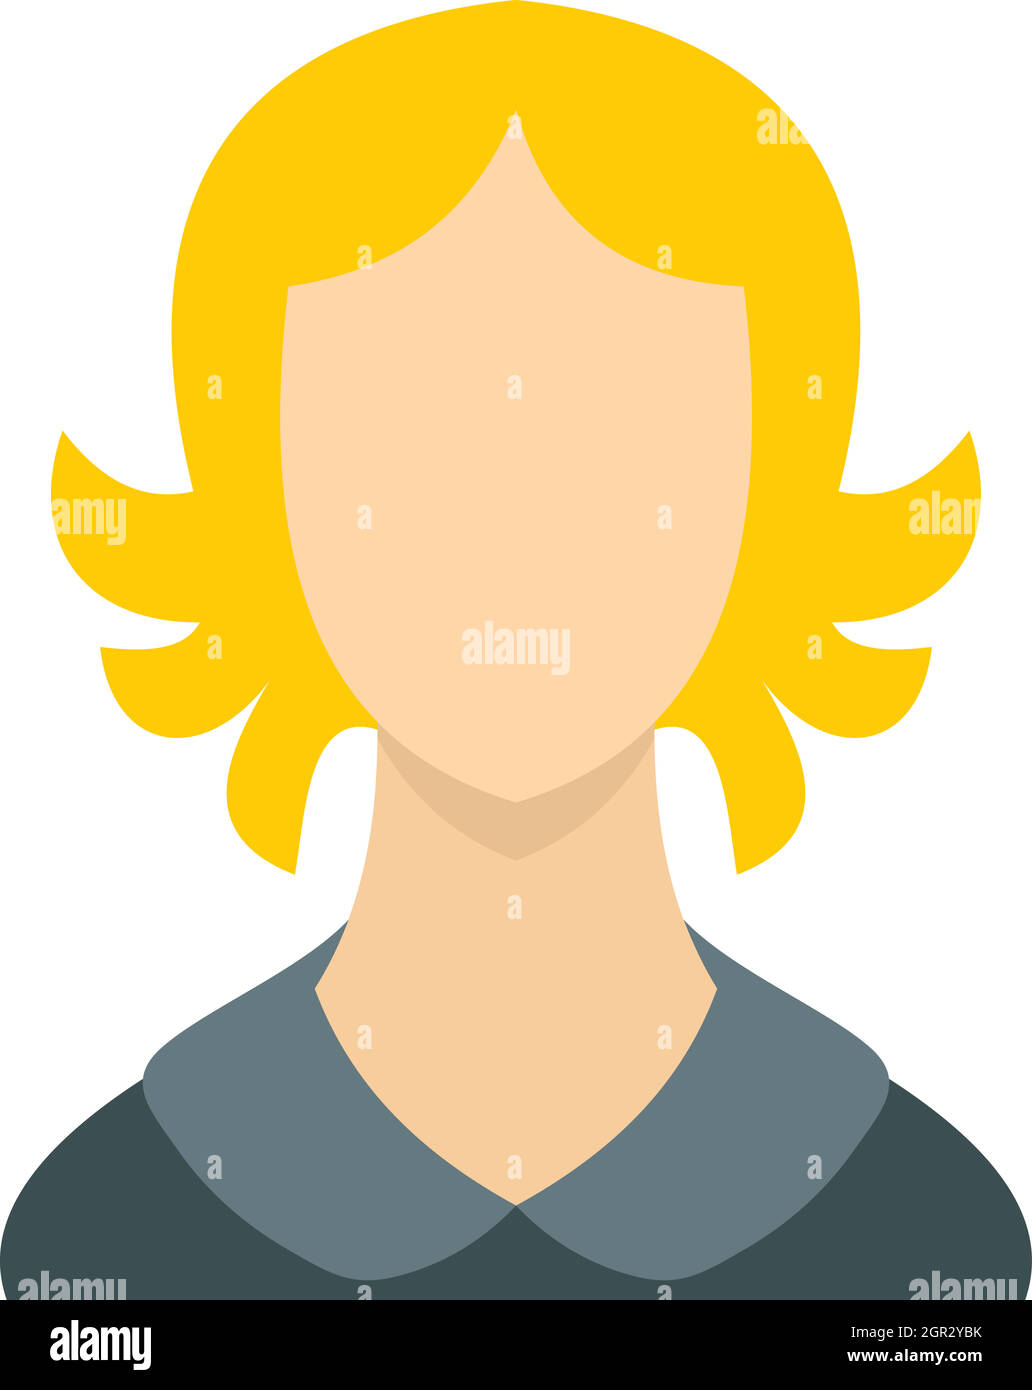 Woman with blond hair icon, flat style Stock Vector